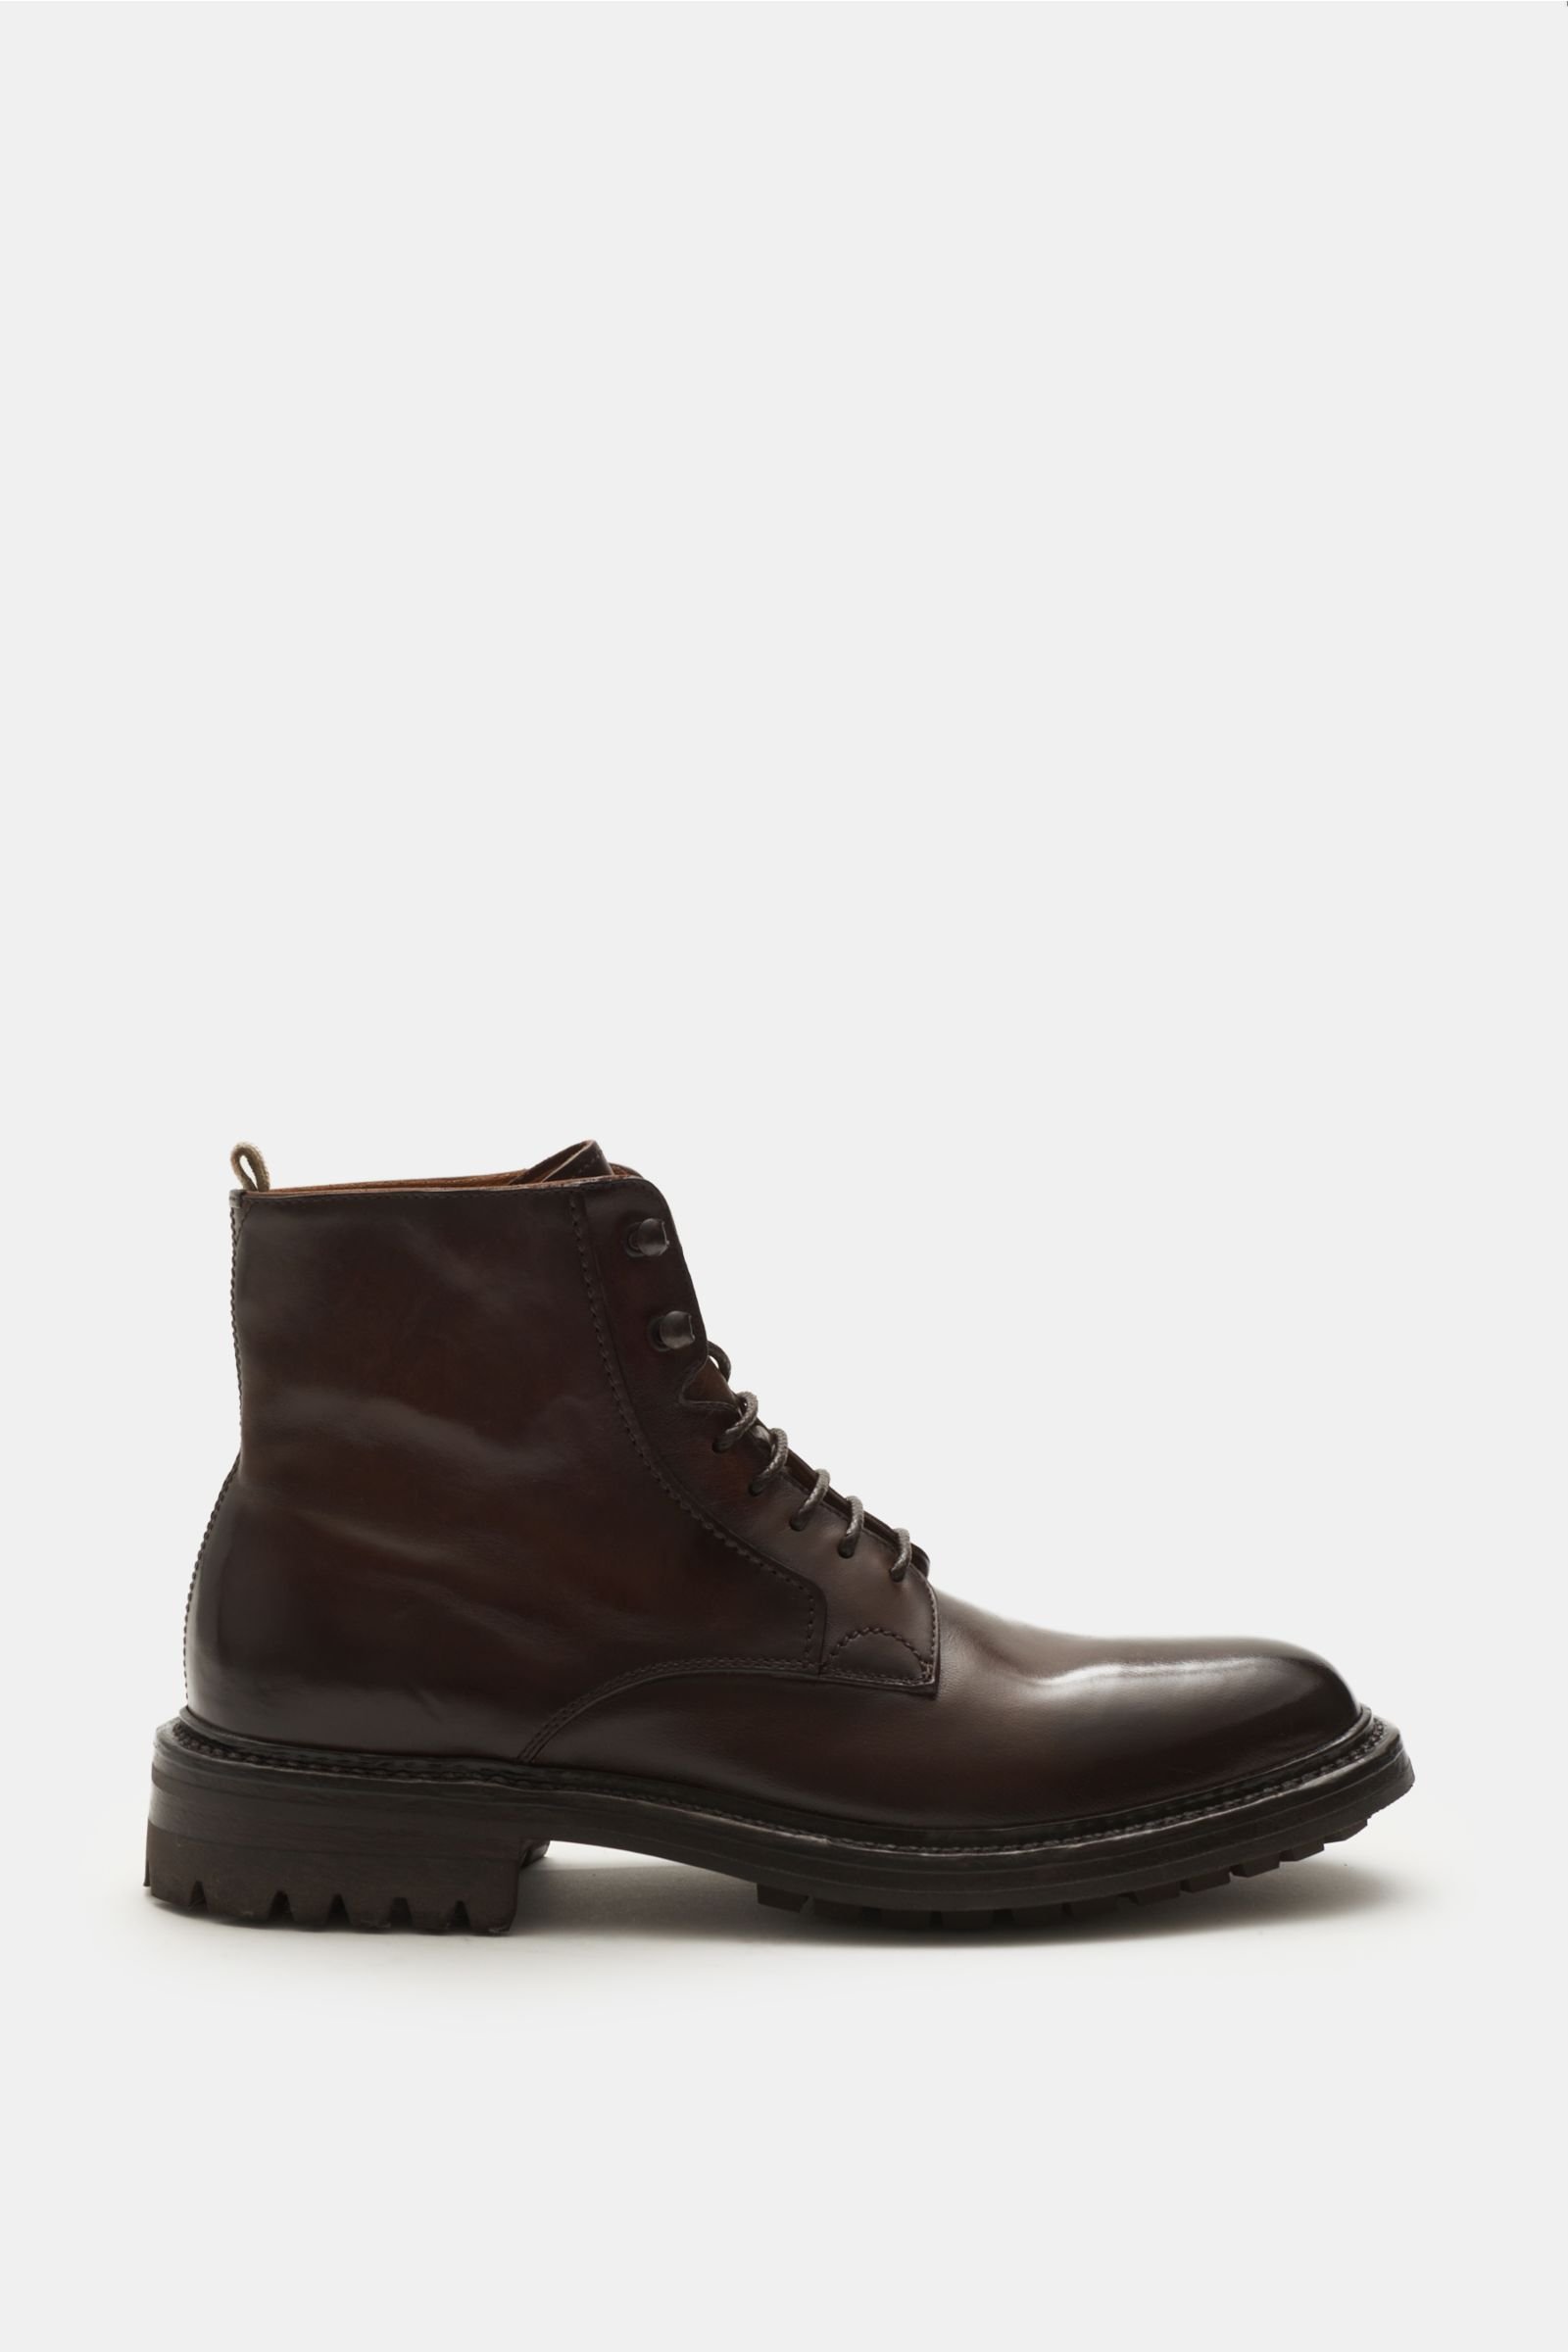 Lace-up boots 'Sheffield 011' dark brown